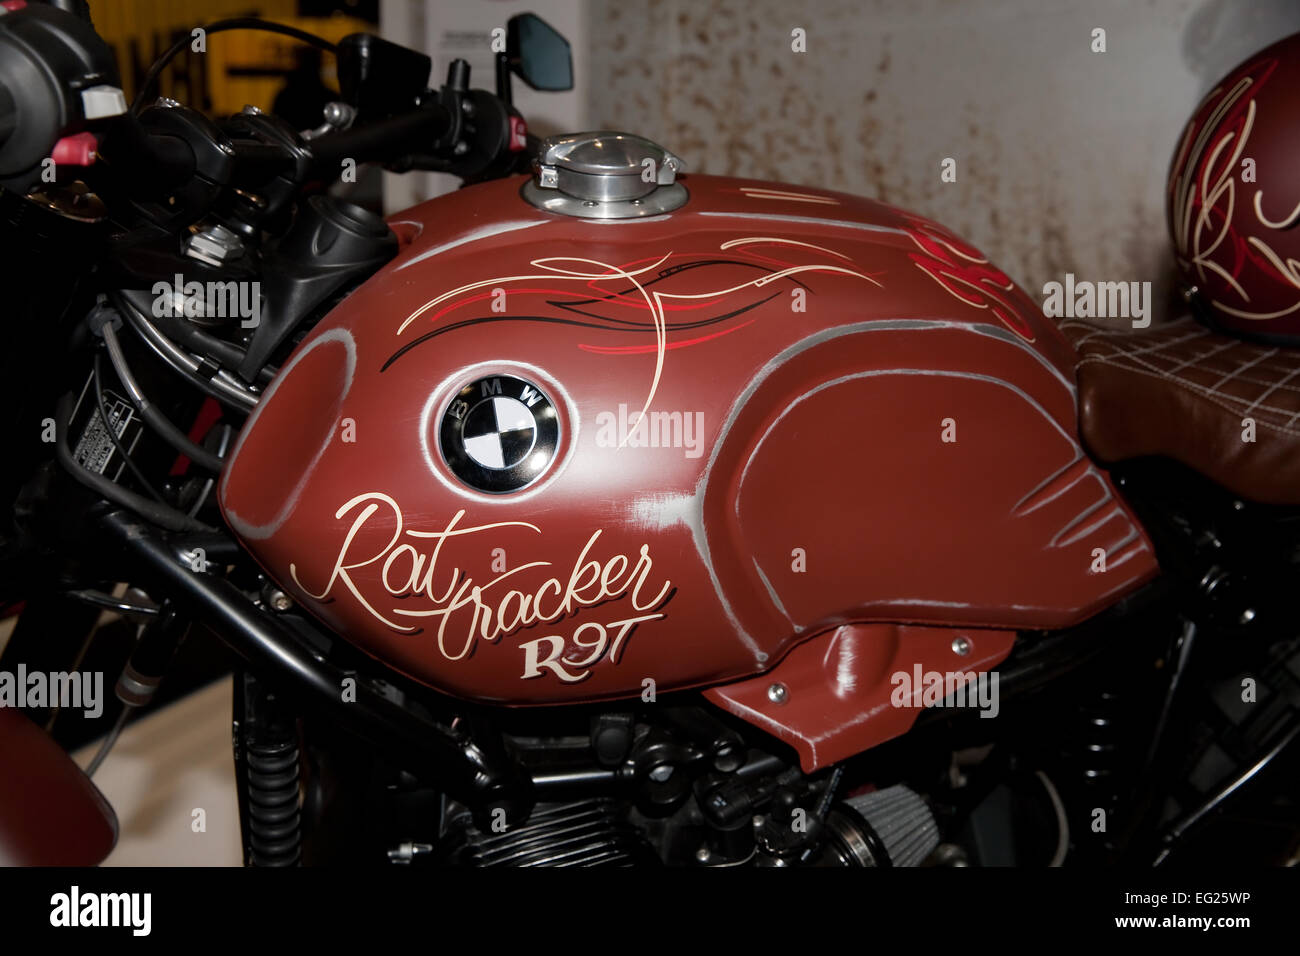 BMW rat tracker R9T fuel tank on show at the Carole Nash London Motorbike show at Excel in London Stock Photo